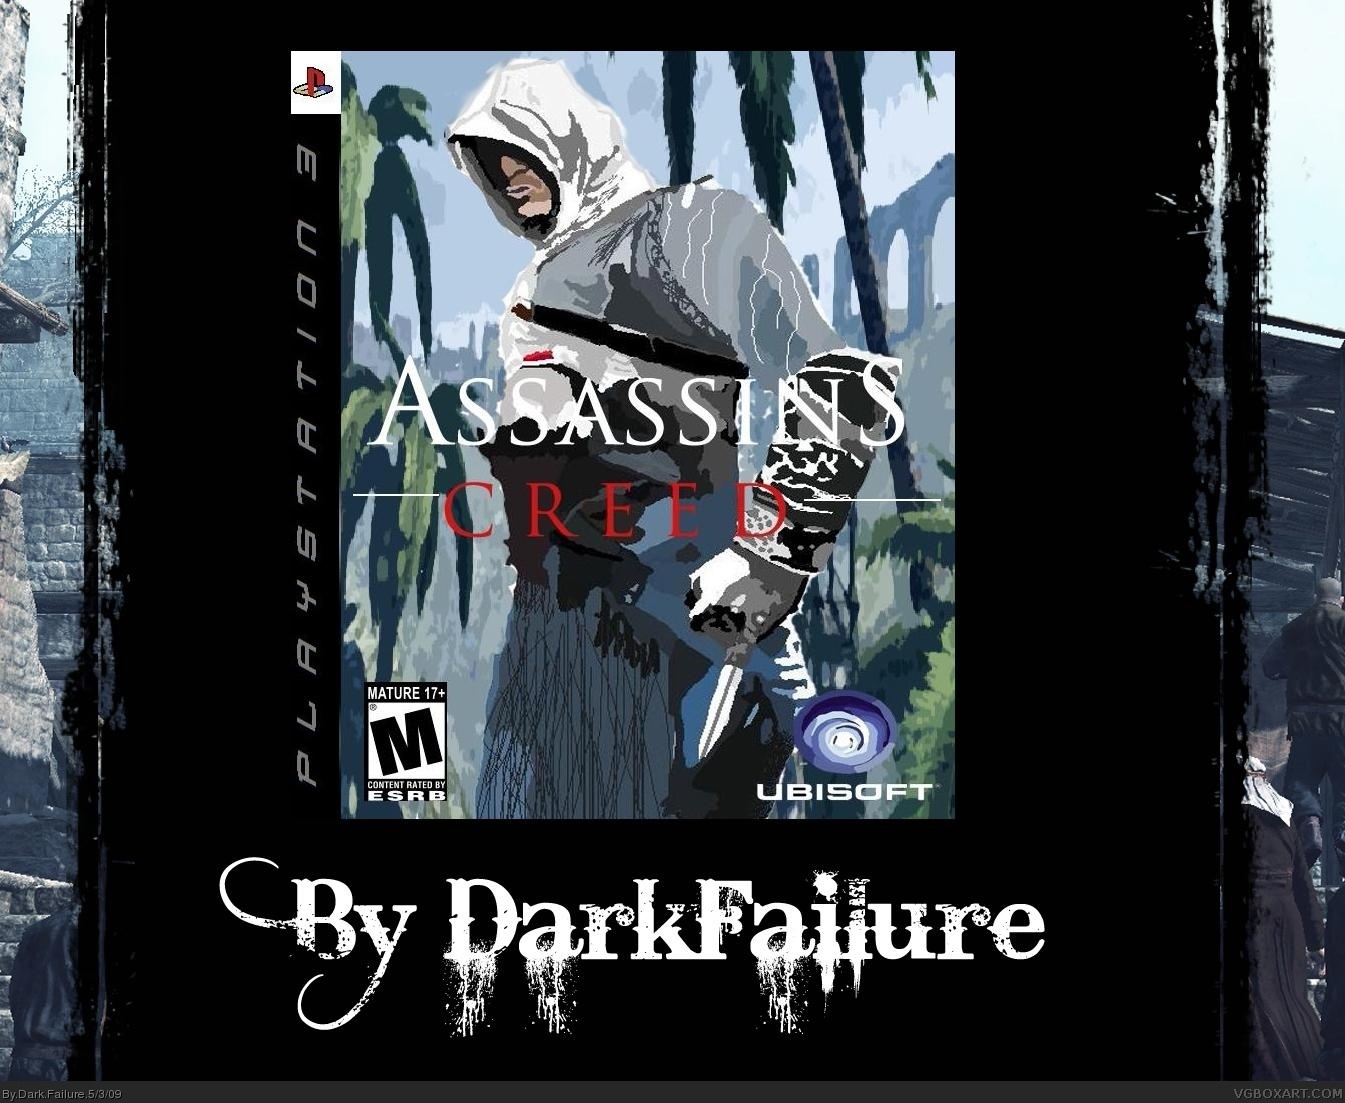 Assassin's Creed - Paint box cover